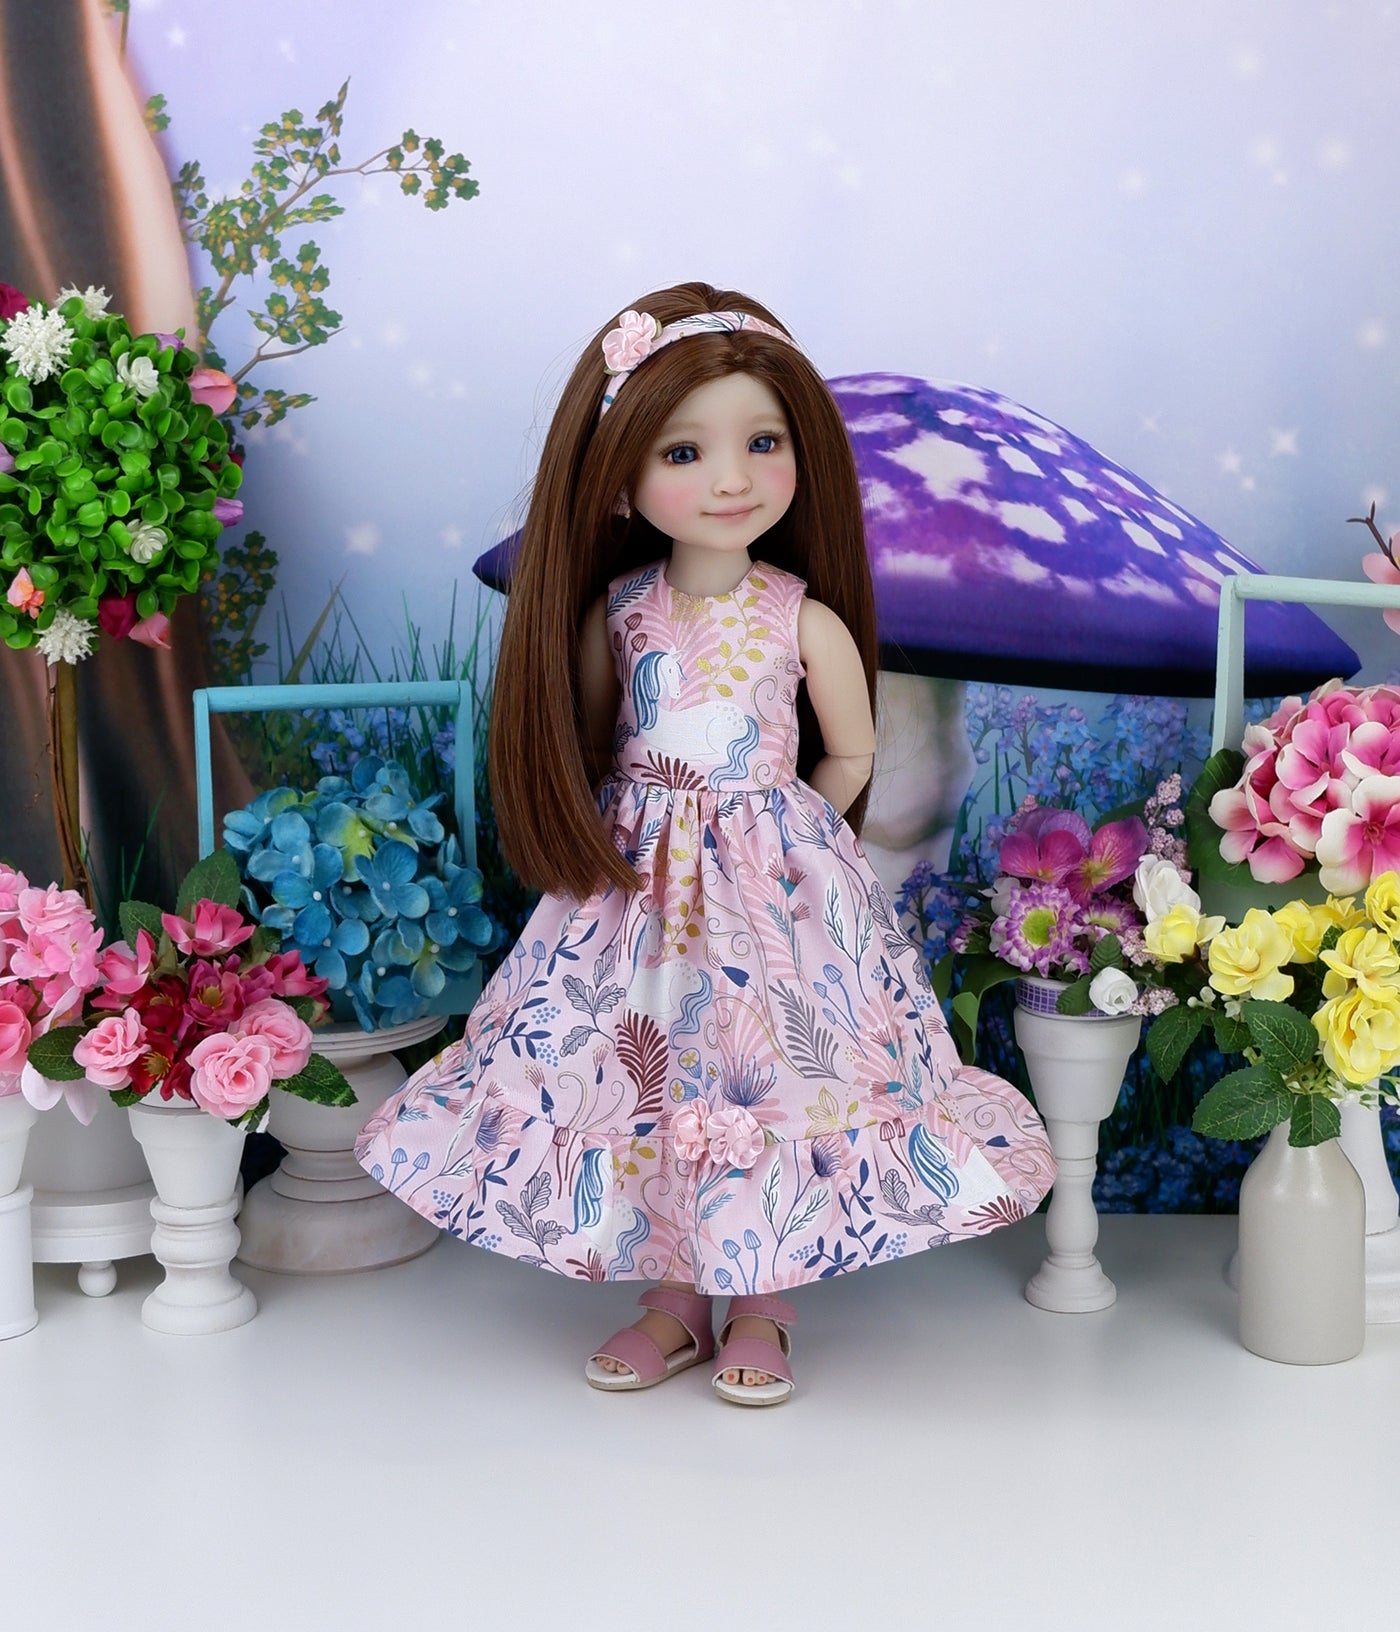 Unicorn Tapestry - dress with sandals for Ruby Red Fashion Friends doll